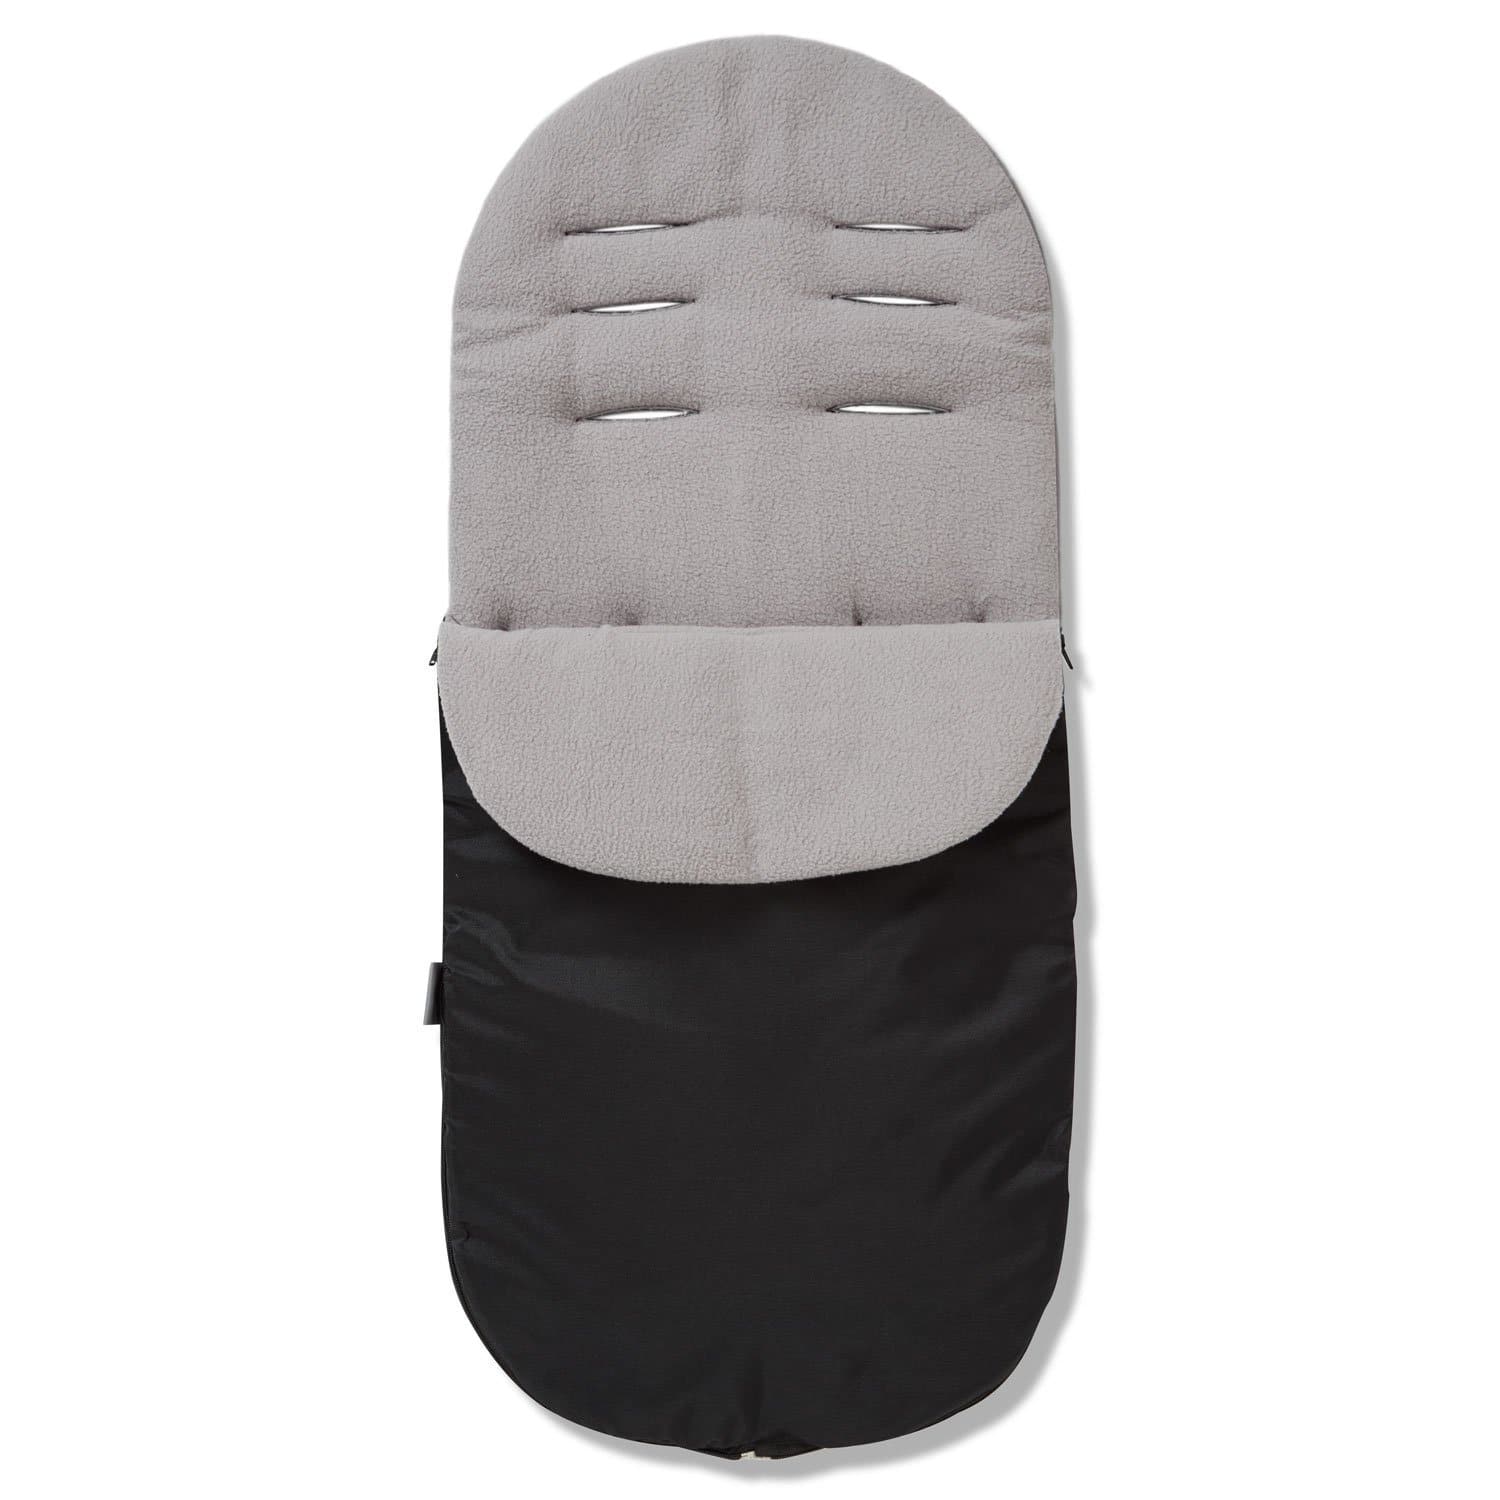 Footmuff / Cosy Toes Compatible with Bebe Confort - Grey / Fits All Models | For Your Little One